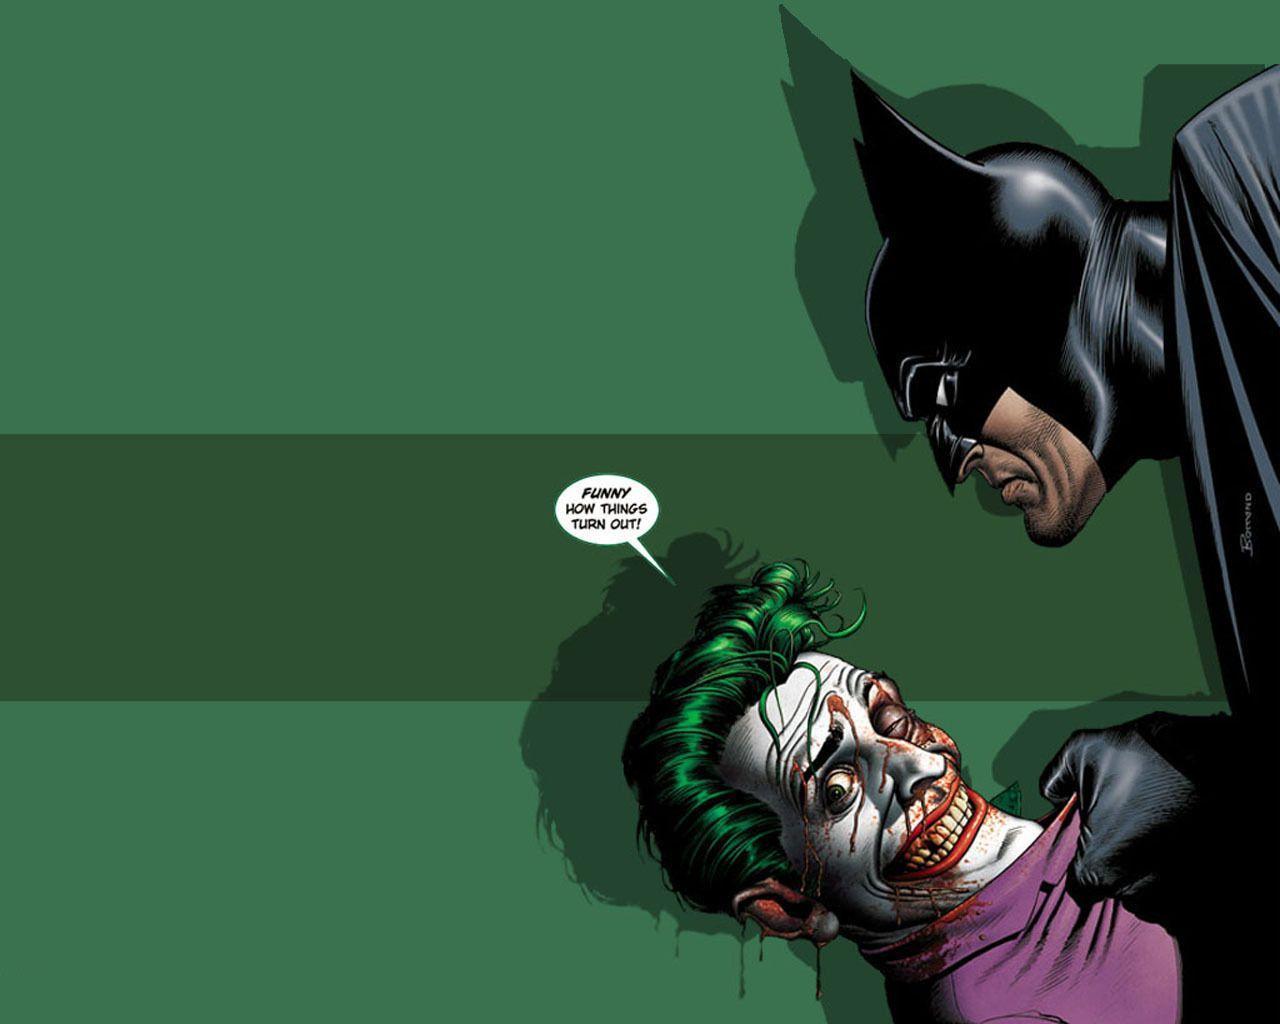 Awesome Joker Batman Fight HD Wallpaper. Equality. Step Up